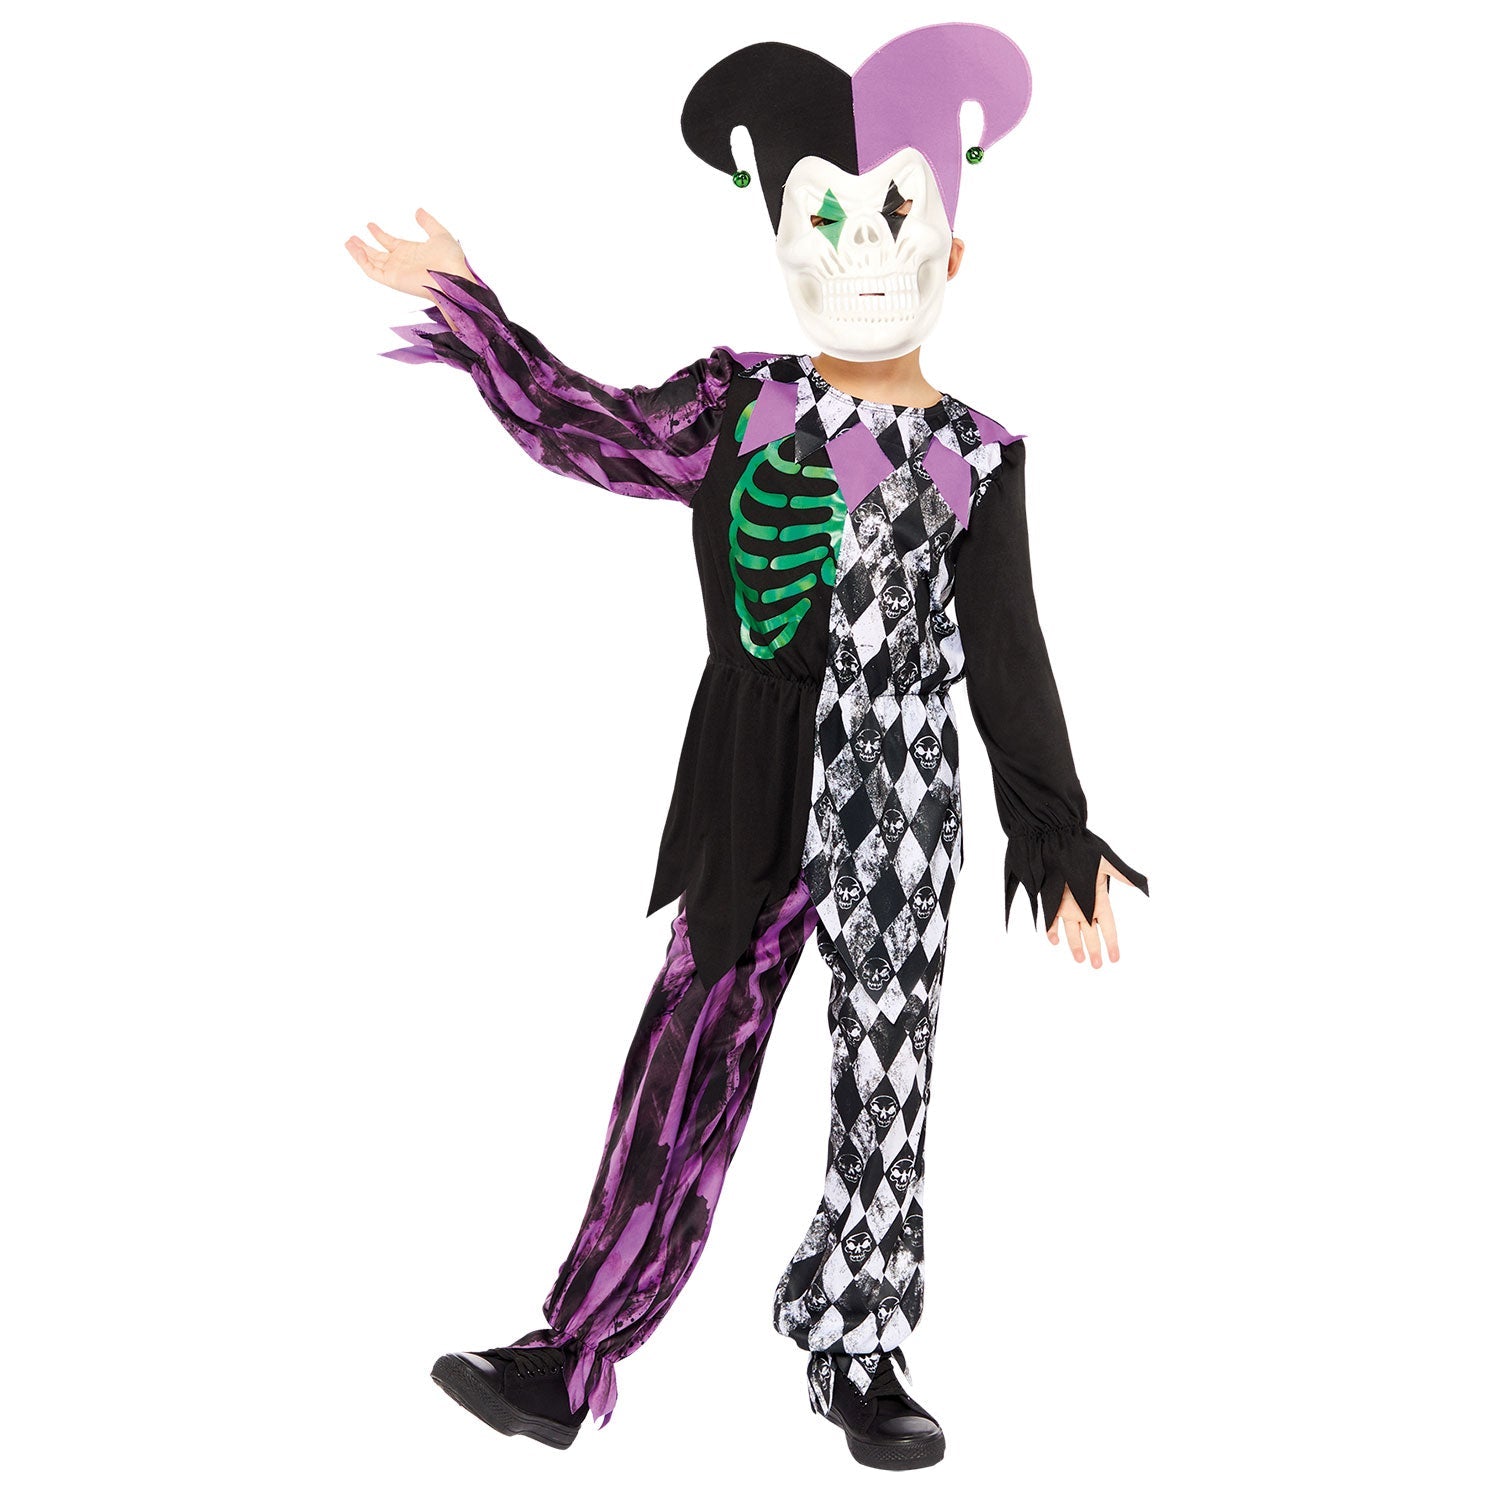 Jester Boy Costume includes, top, trousers and mask